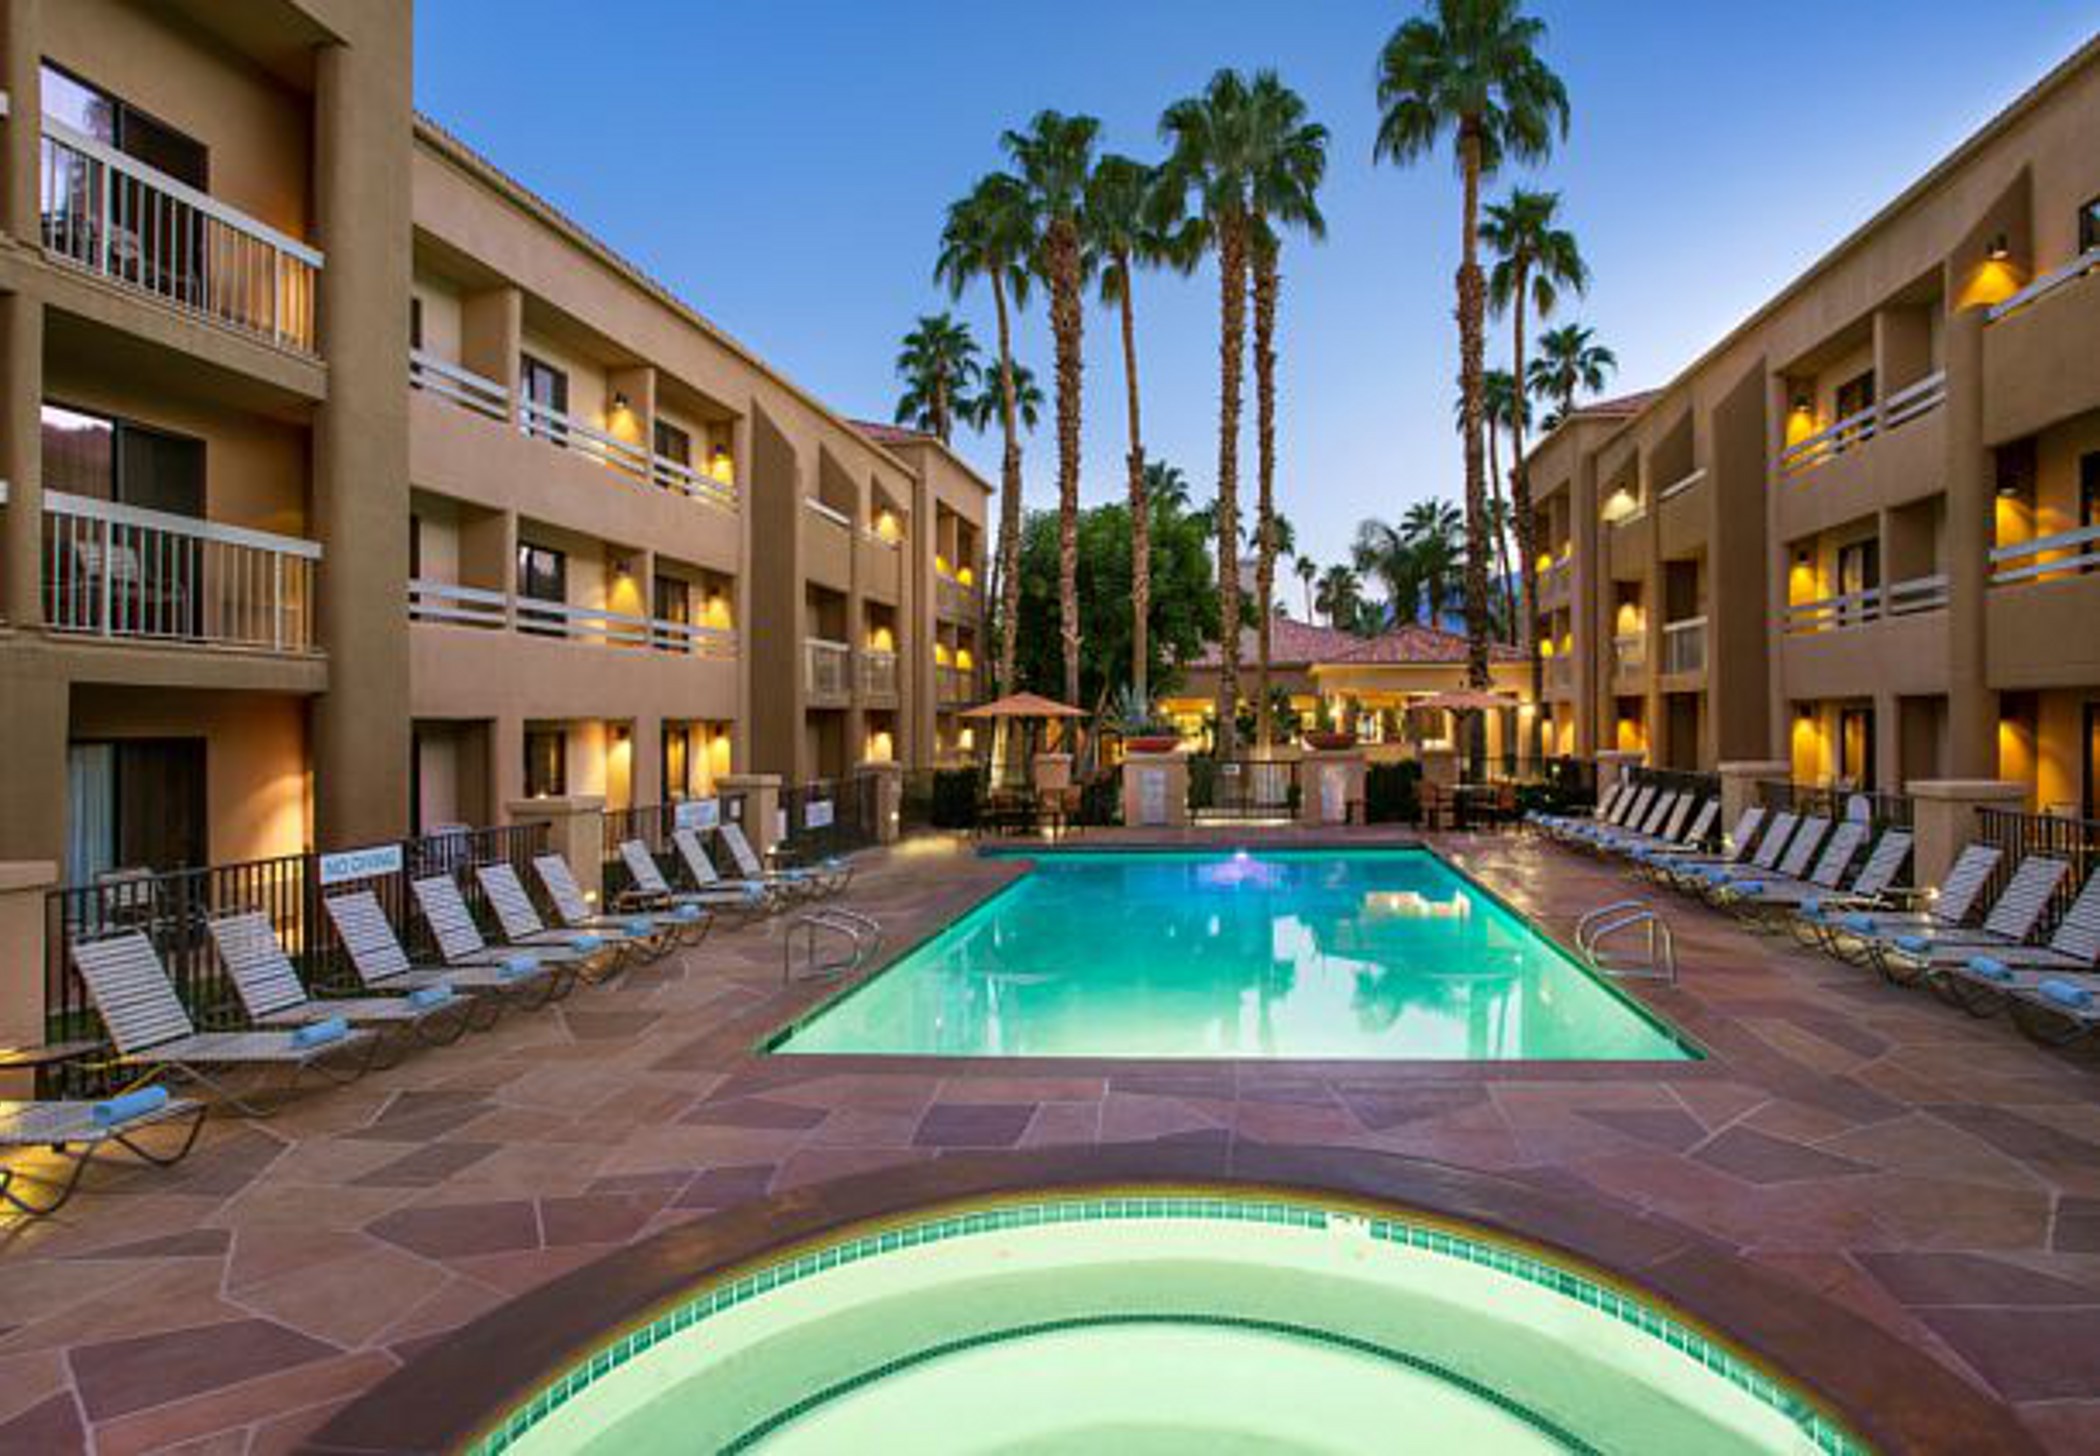 Courtyard by Marriott Palm Springs image